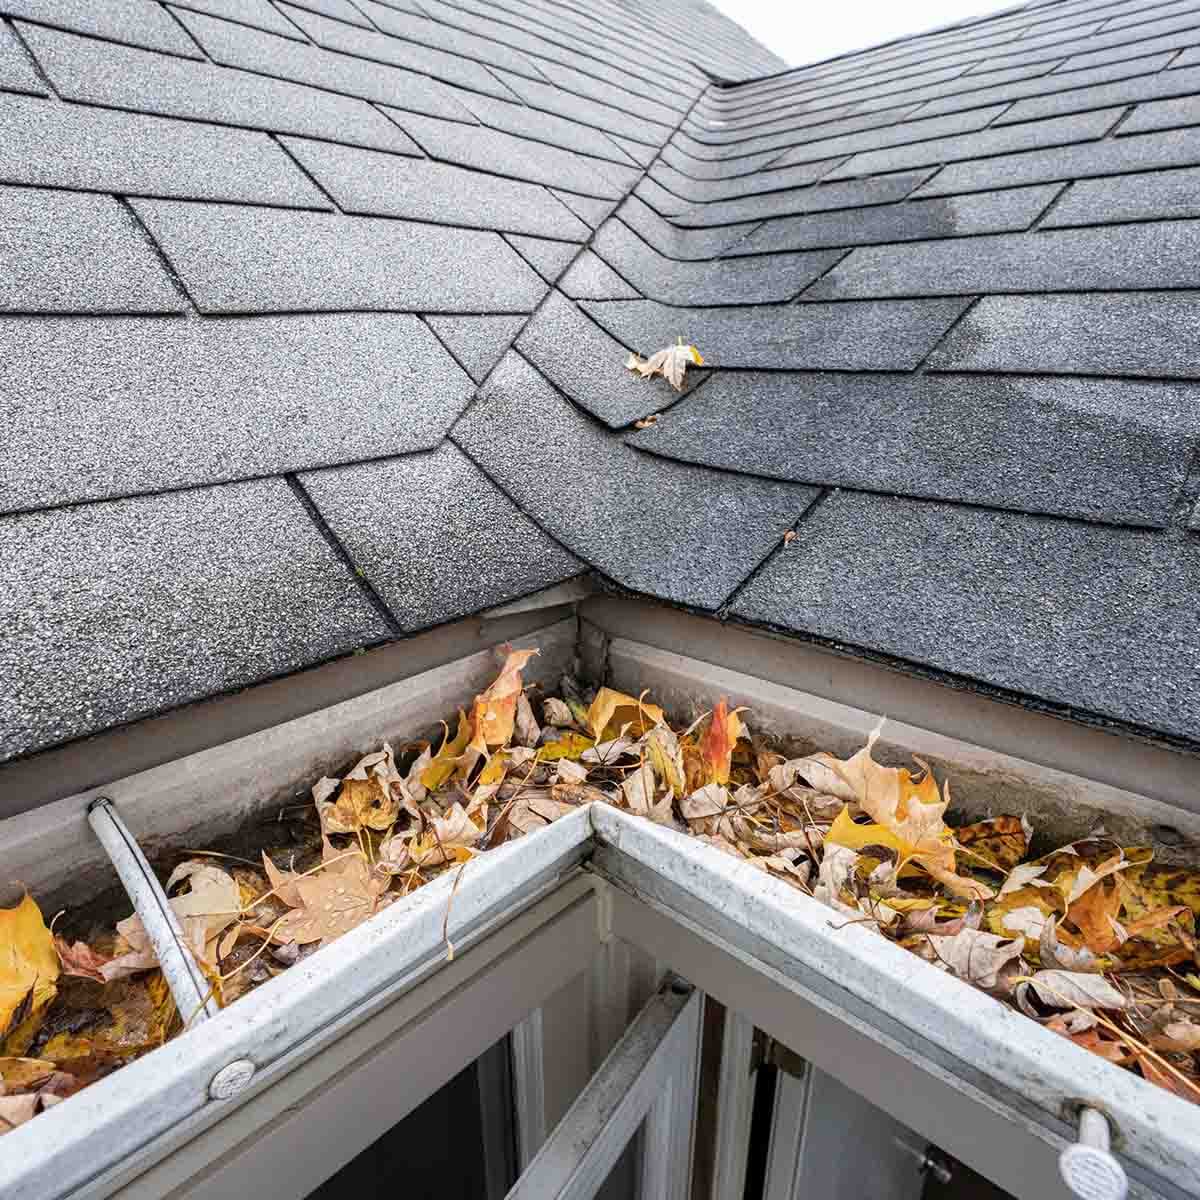 Residential Gutter Cleaning Services from NC Paint and PowerWash